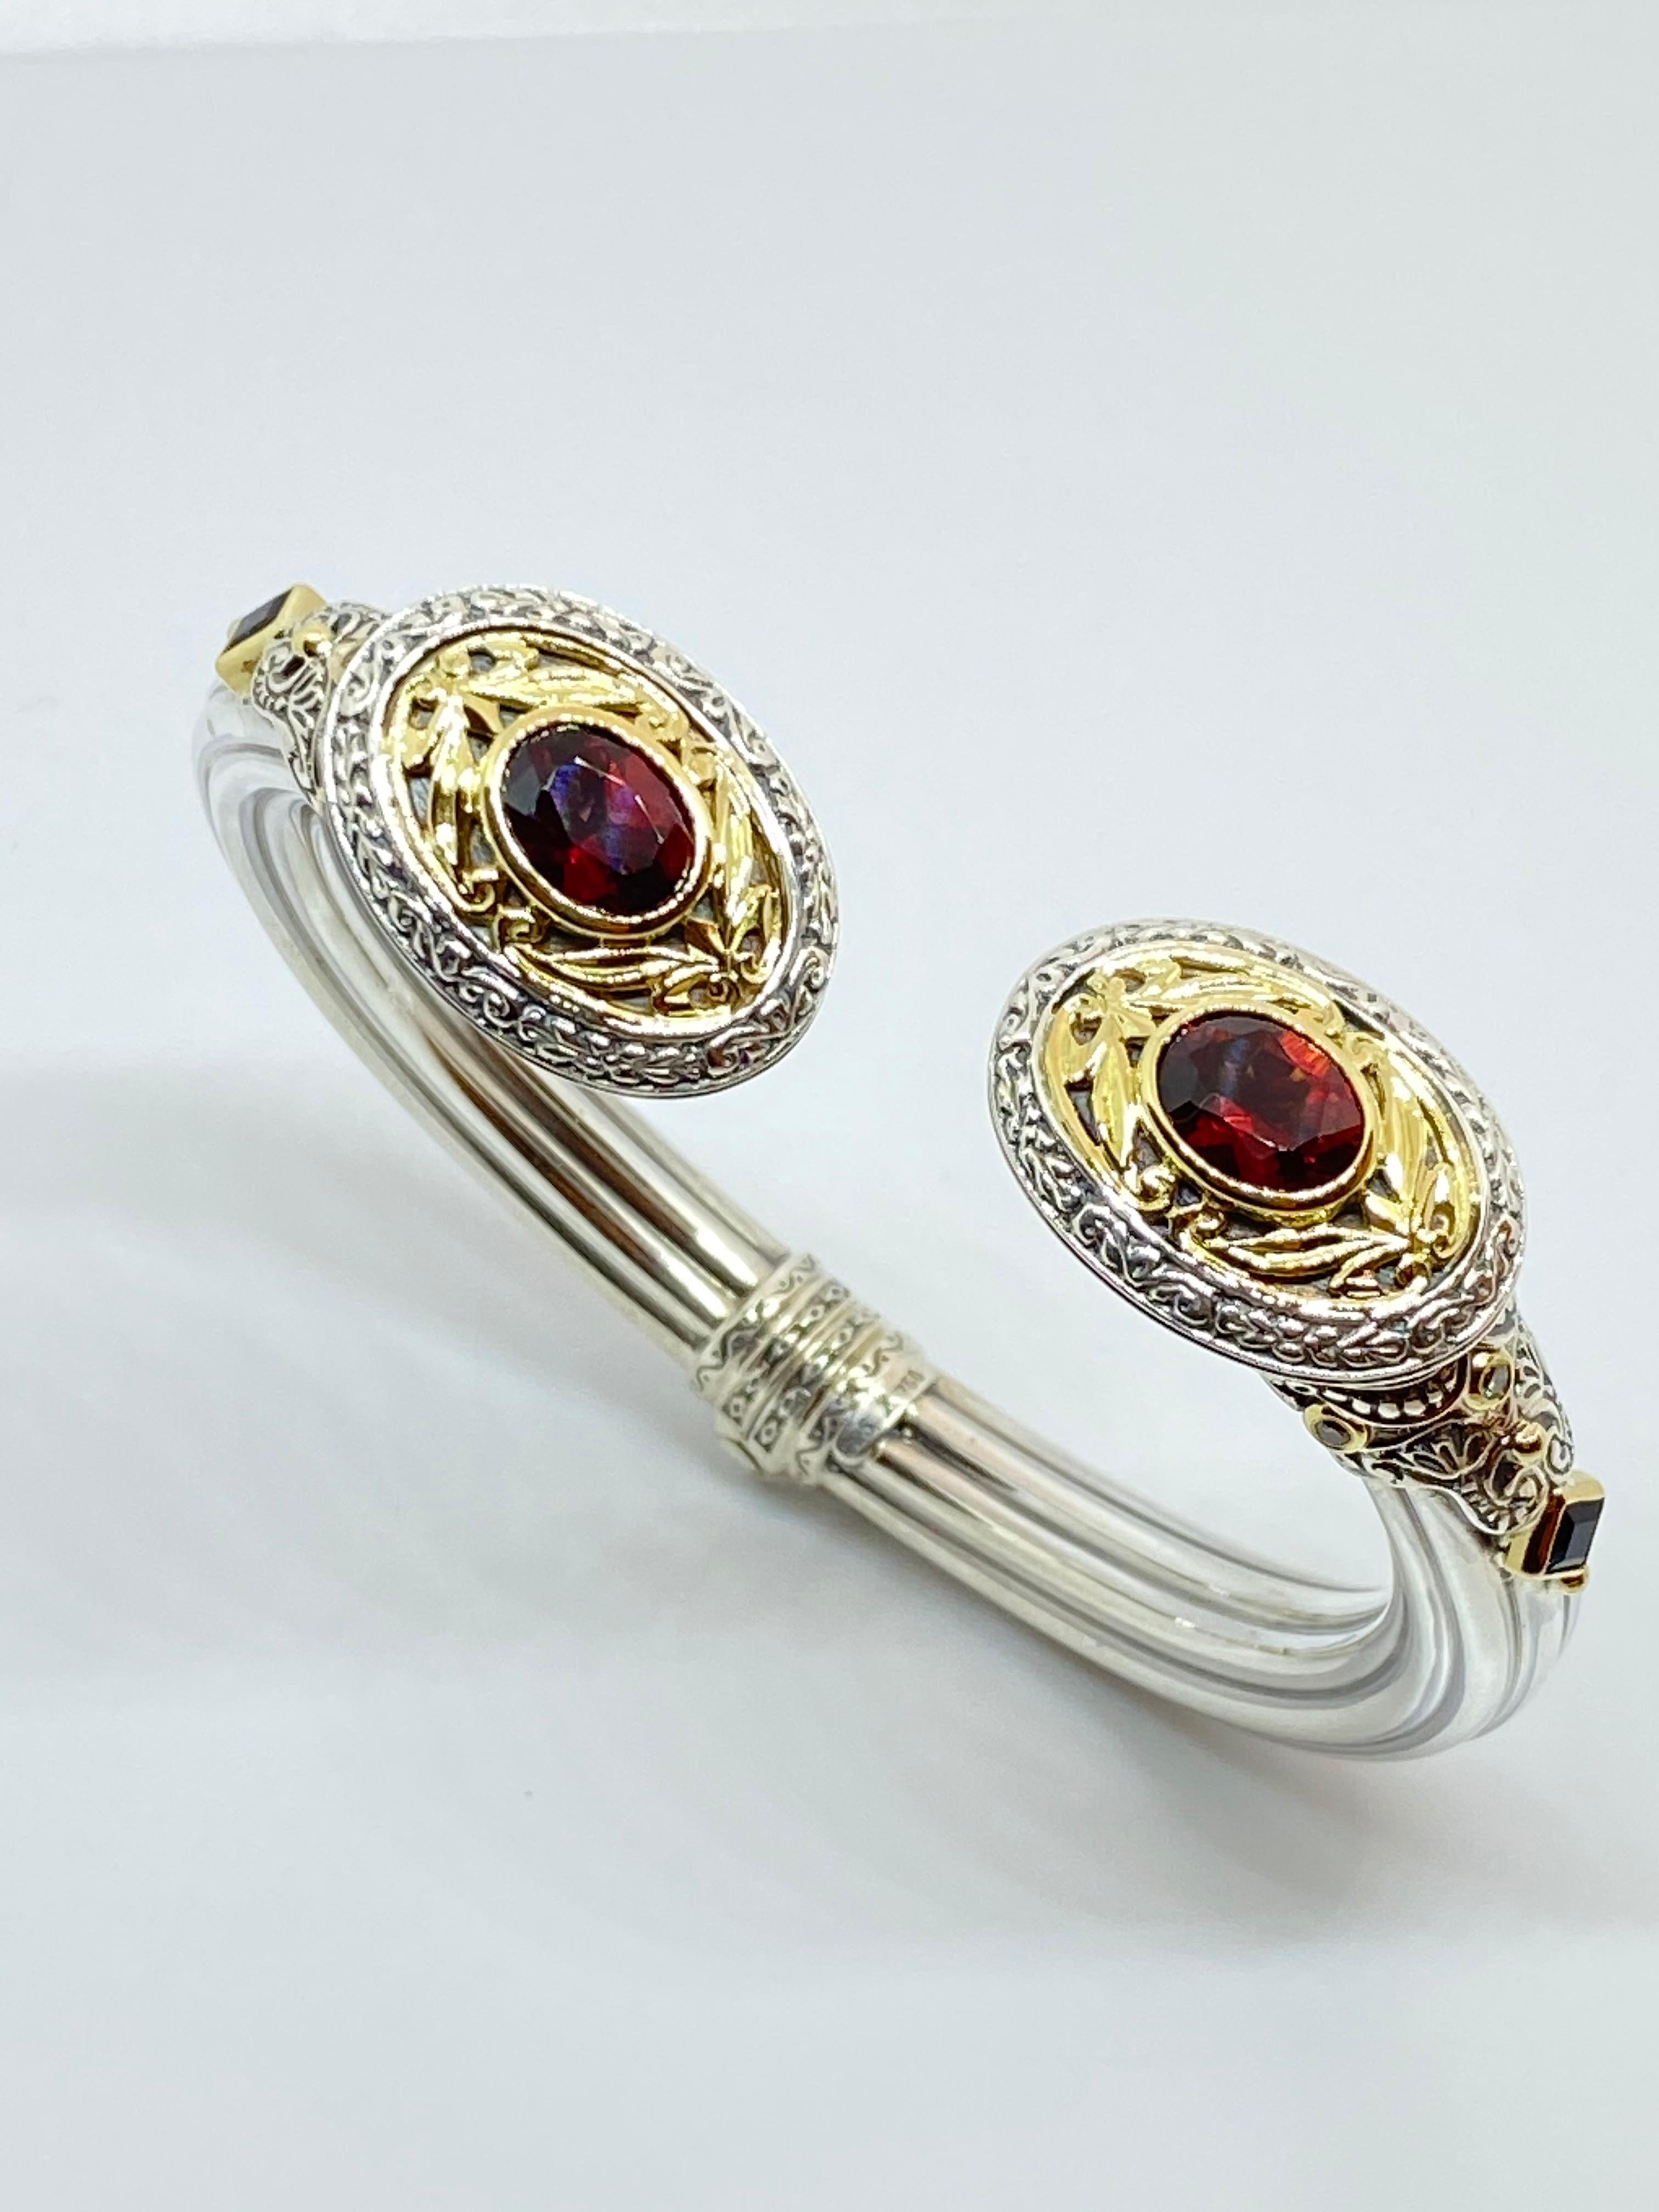 This S.Georgios designer Silver with Yellow Gold 18 karat Cuff Bracelet is all handmade and features 2 Oval cut Red Garnets total weight 2.78 Carat. This stunning Cuff Bracelet is accentuated with 2 Princess cut Blue Sapphires total weight 0.32